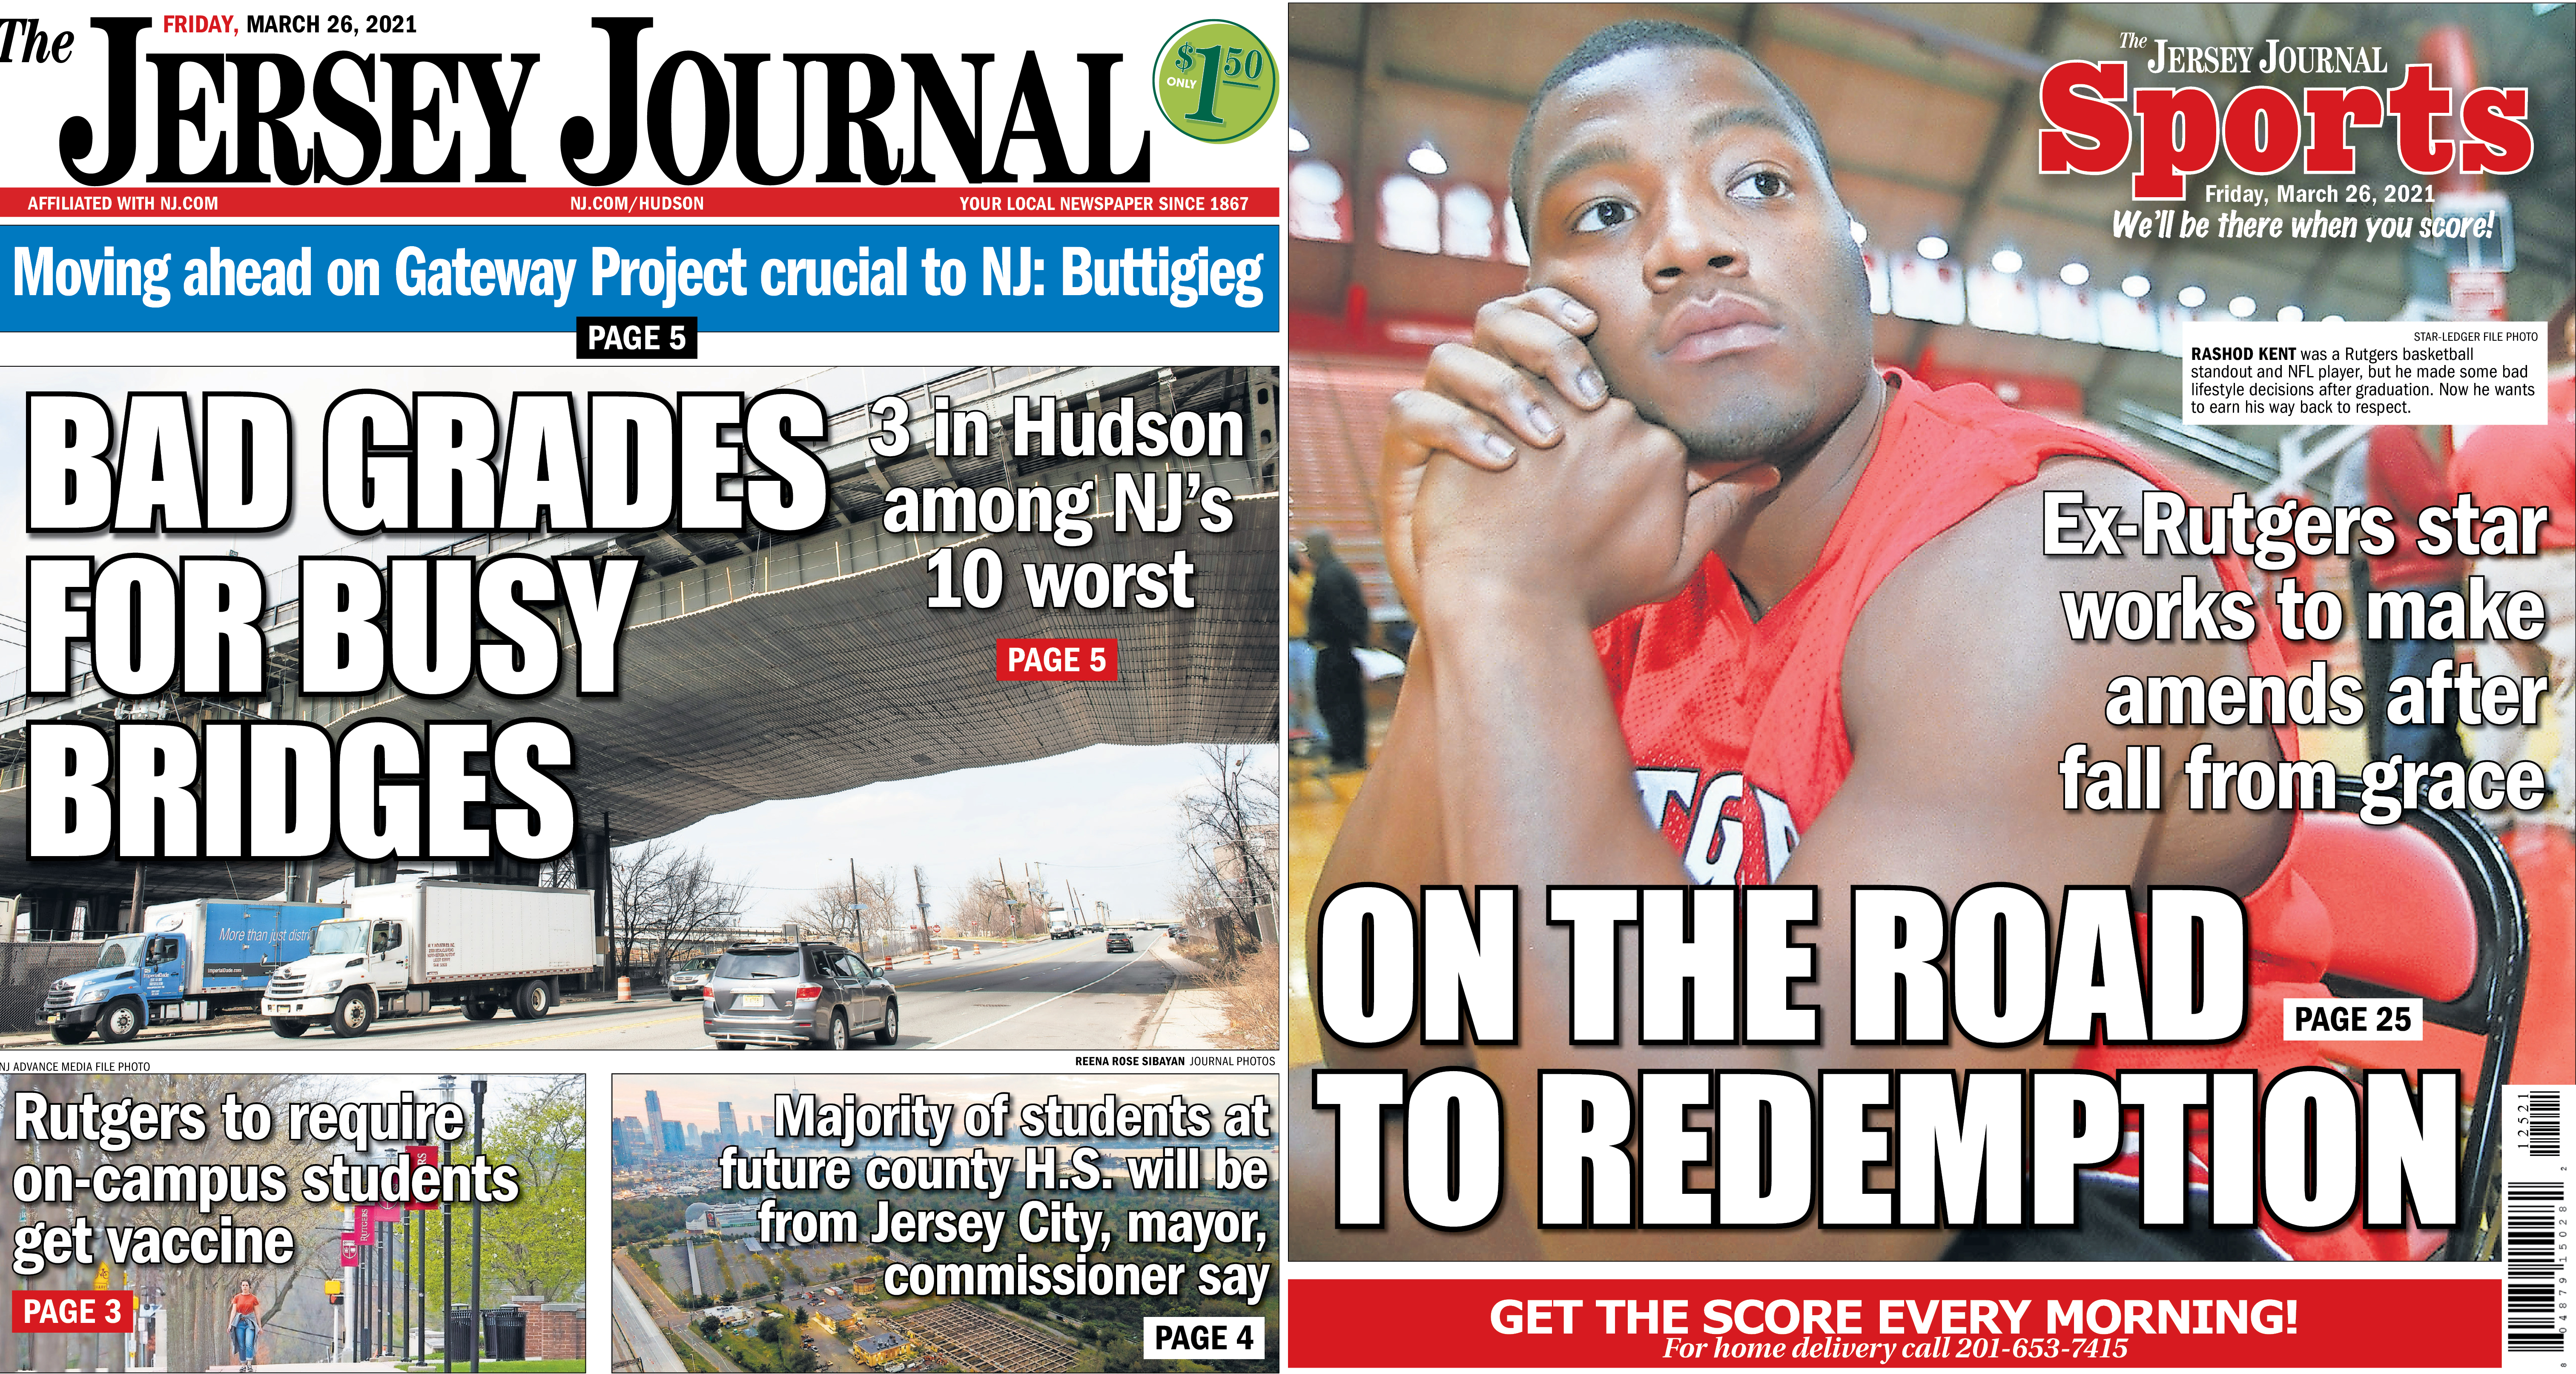 Groot helpen metriek Jersey Journal front and back page news: Friday, March 26, 2021 - nj.com